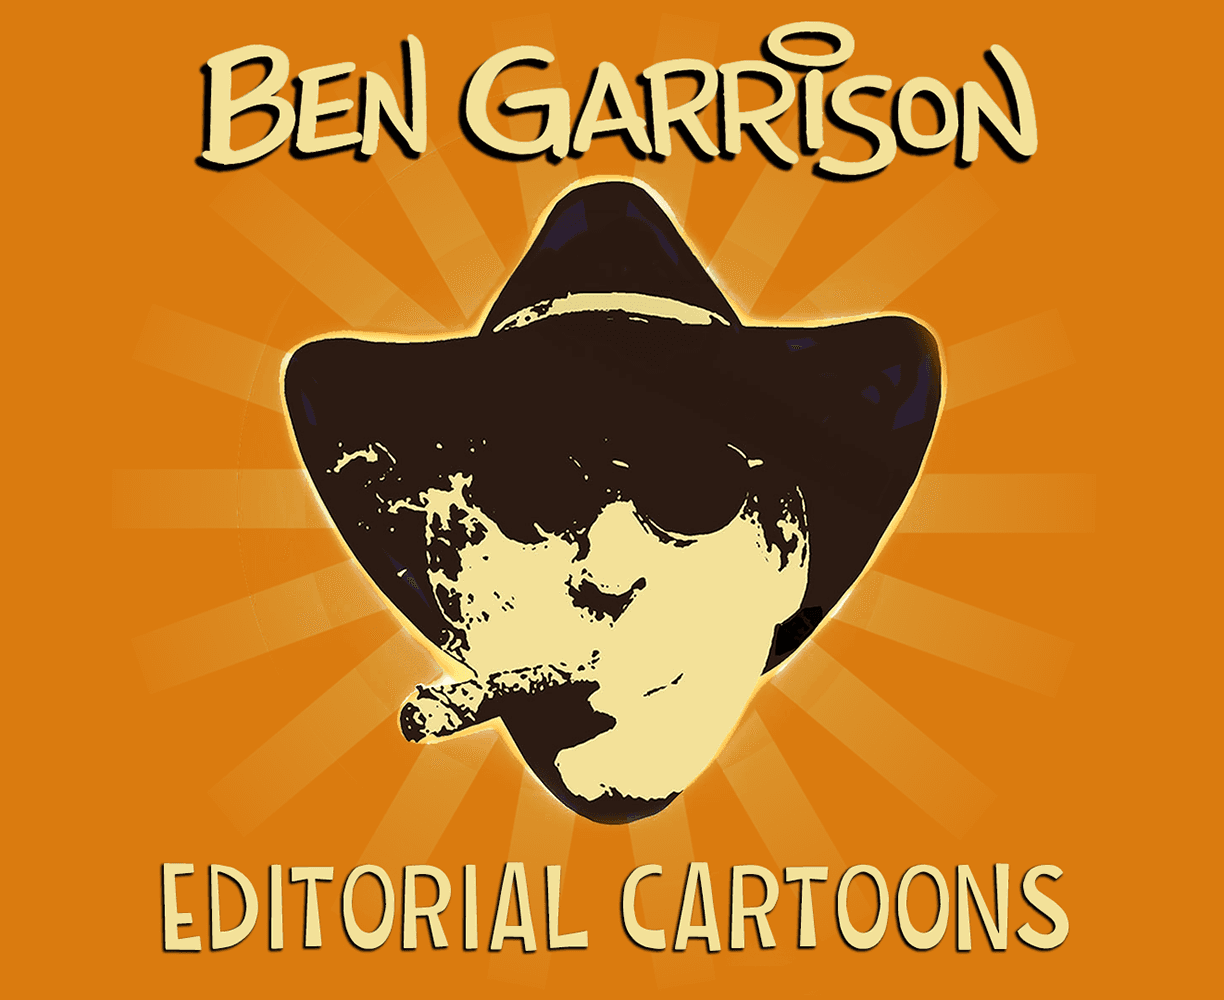 The cover art for the episode Nothing to Bragg About from the comics series Ben Garrison, which is number 138 in the series